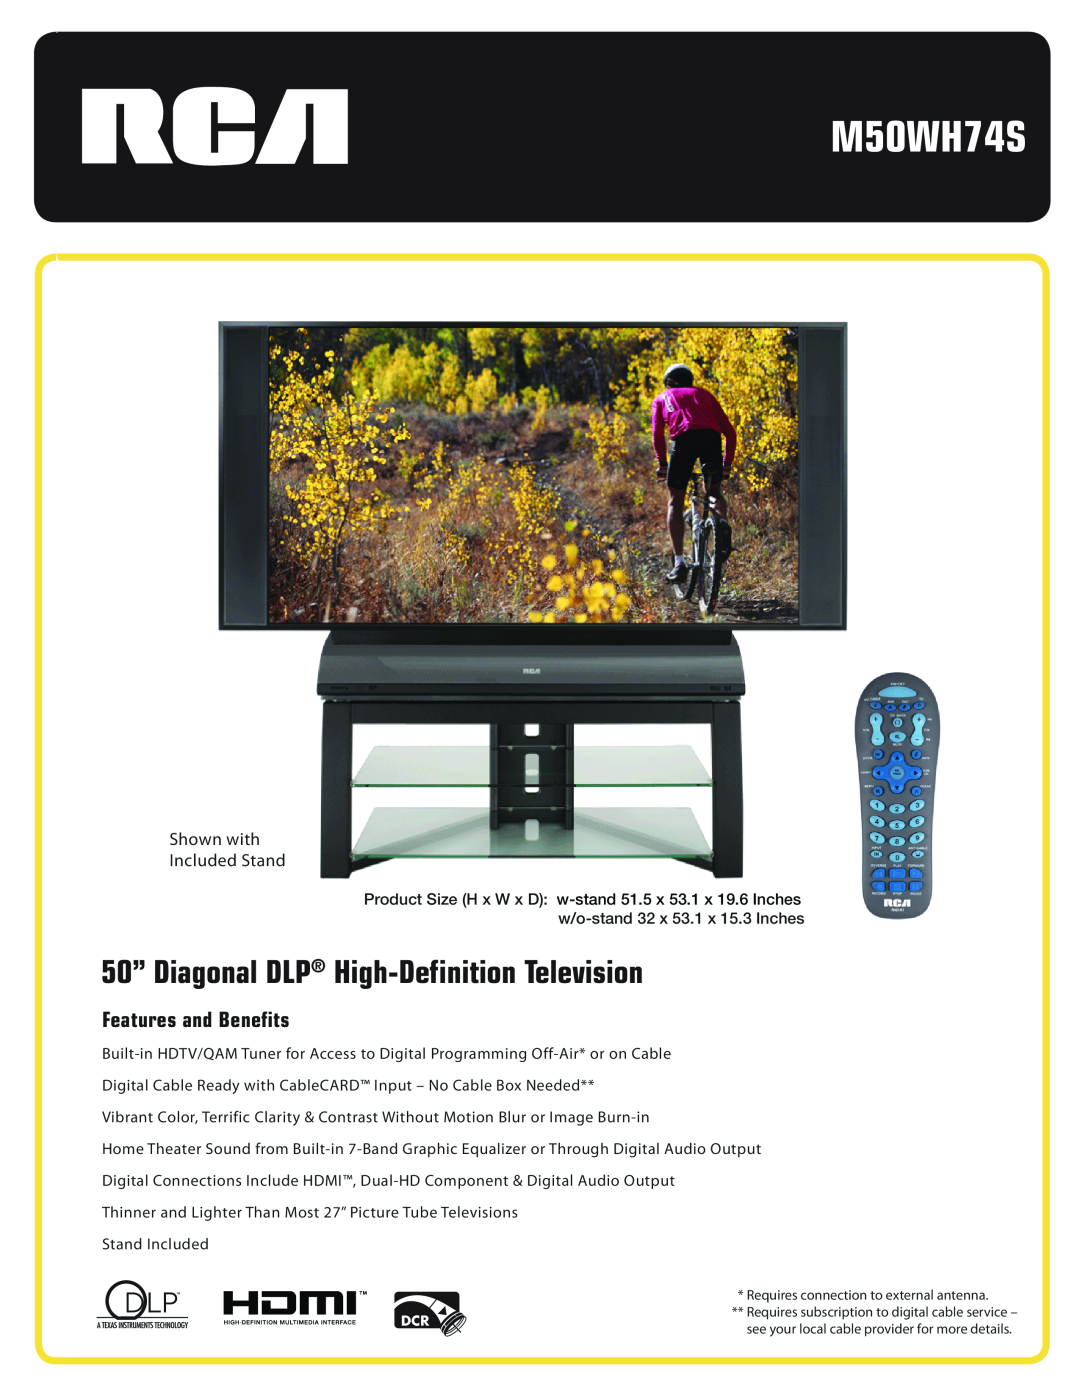 RCA M50WH74S manual 50” Diagonal DLP High-Definition Television, Features and Benefits, Shown with Included Stand 